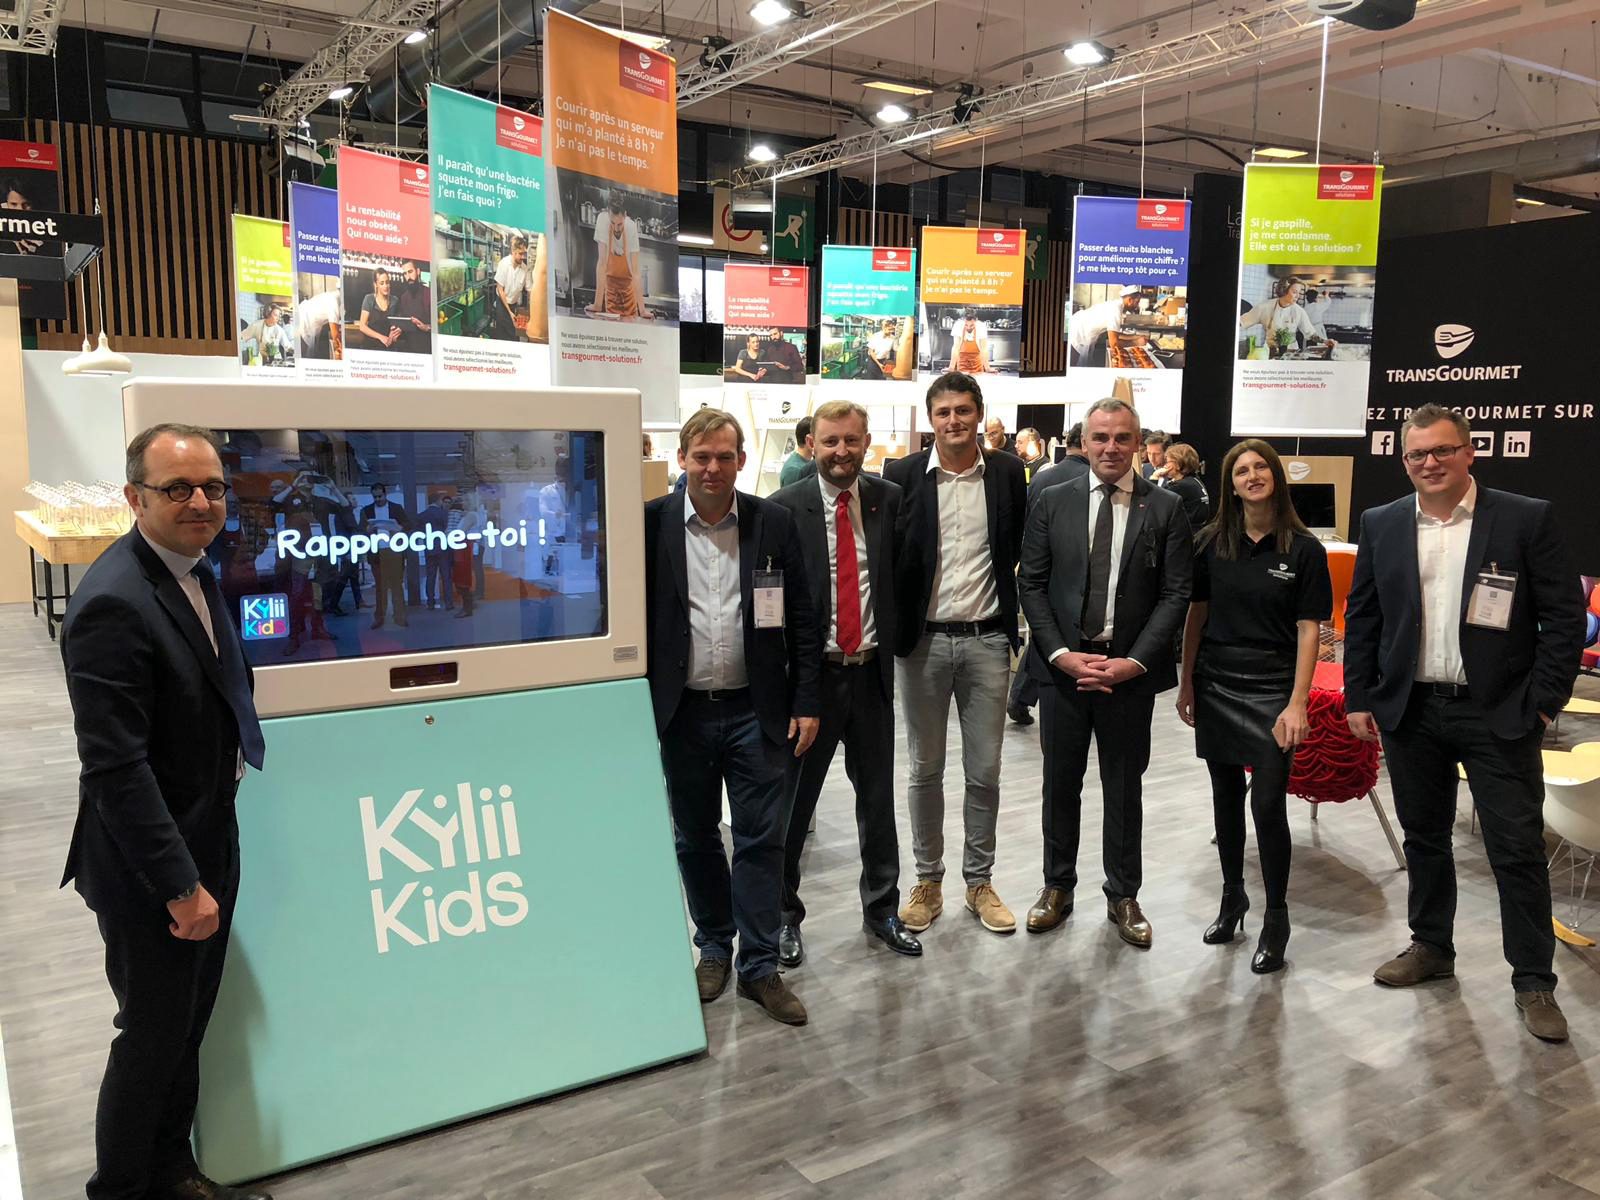 Partnership signed between Transgourmet and Kylii Kids